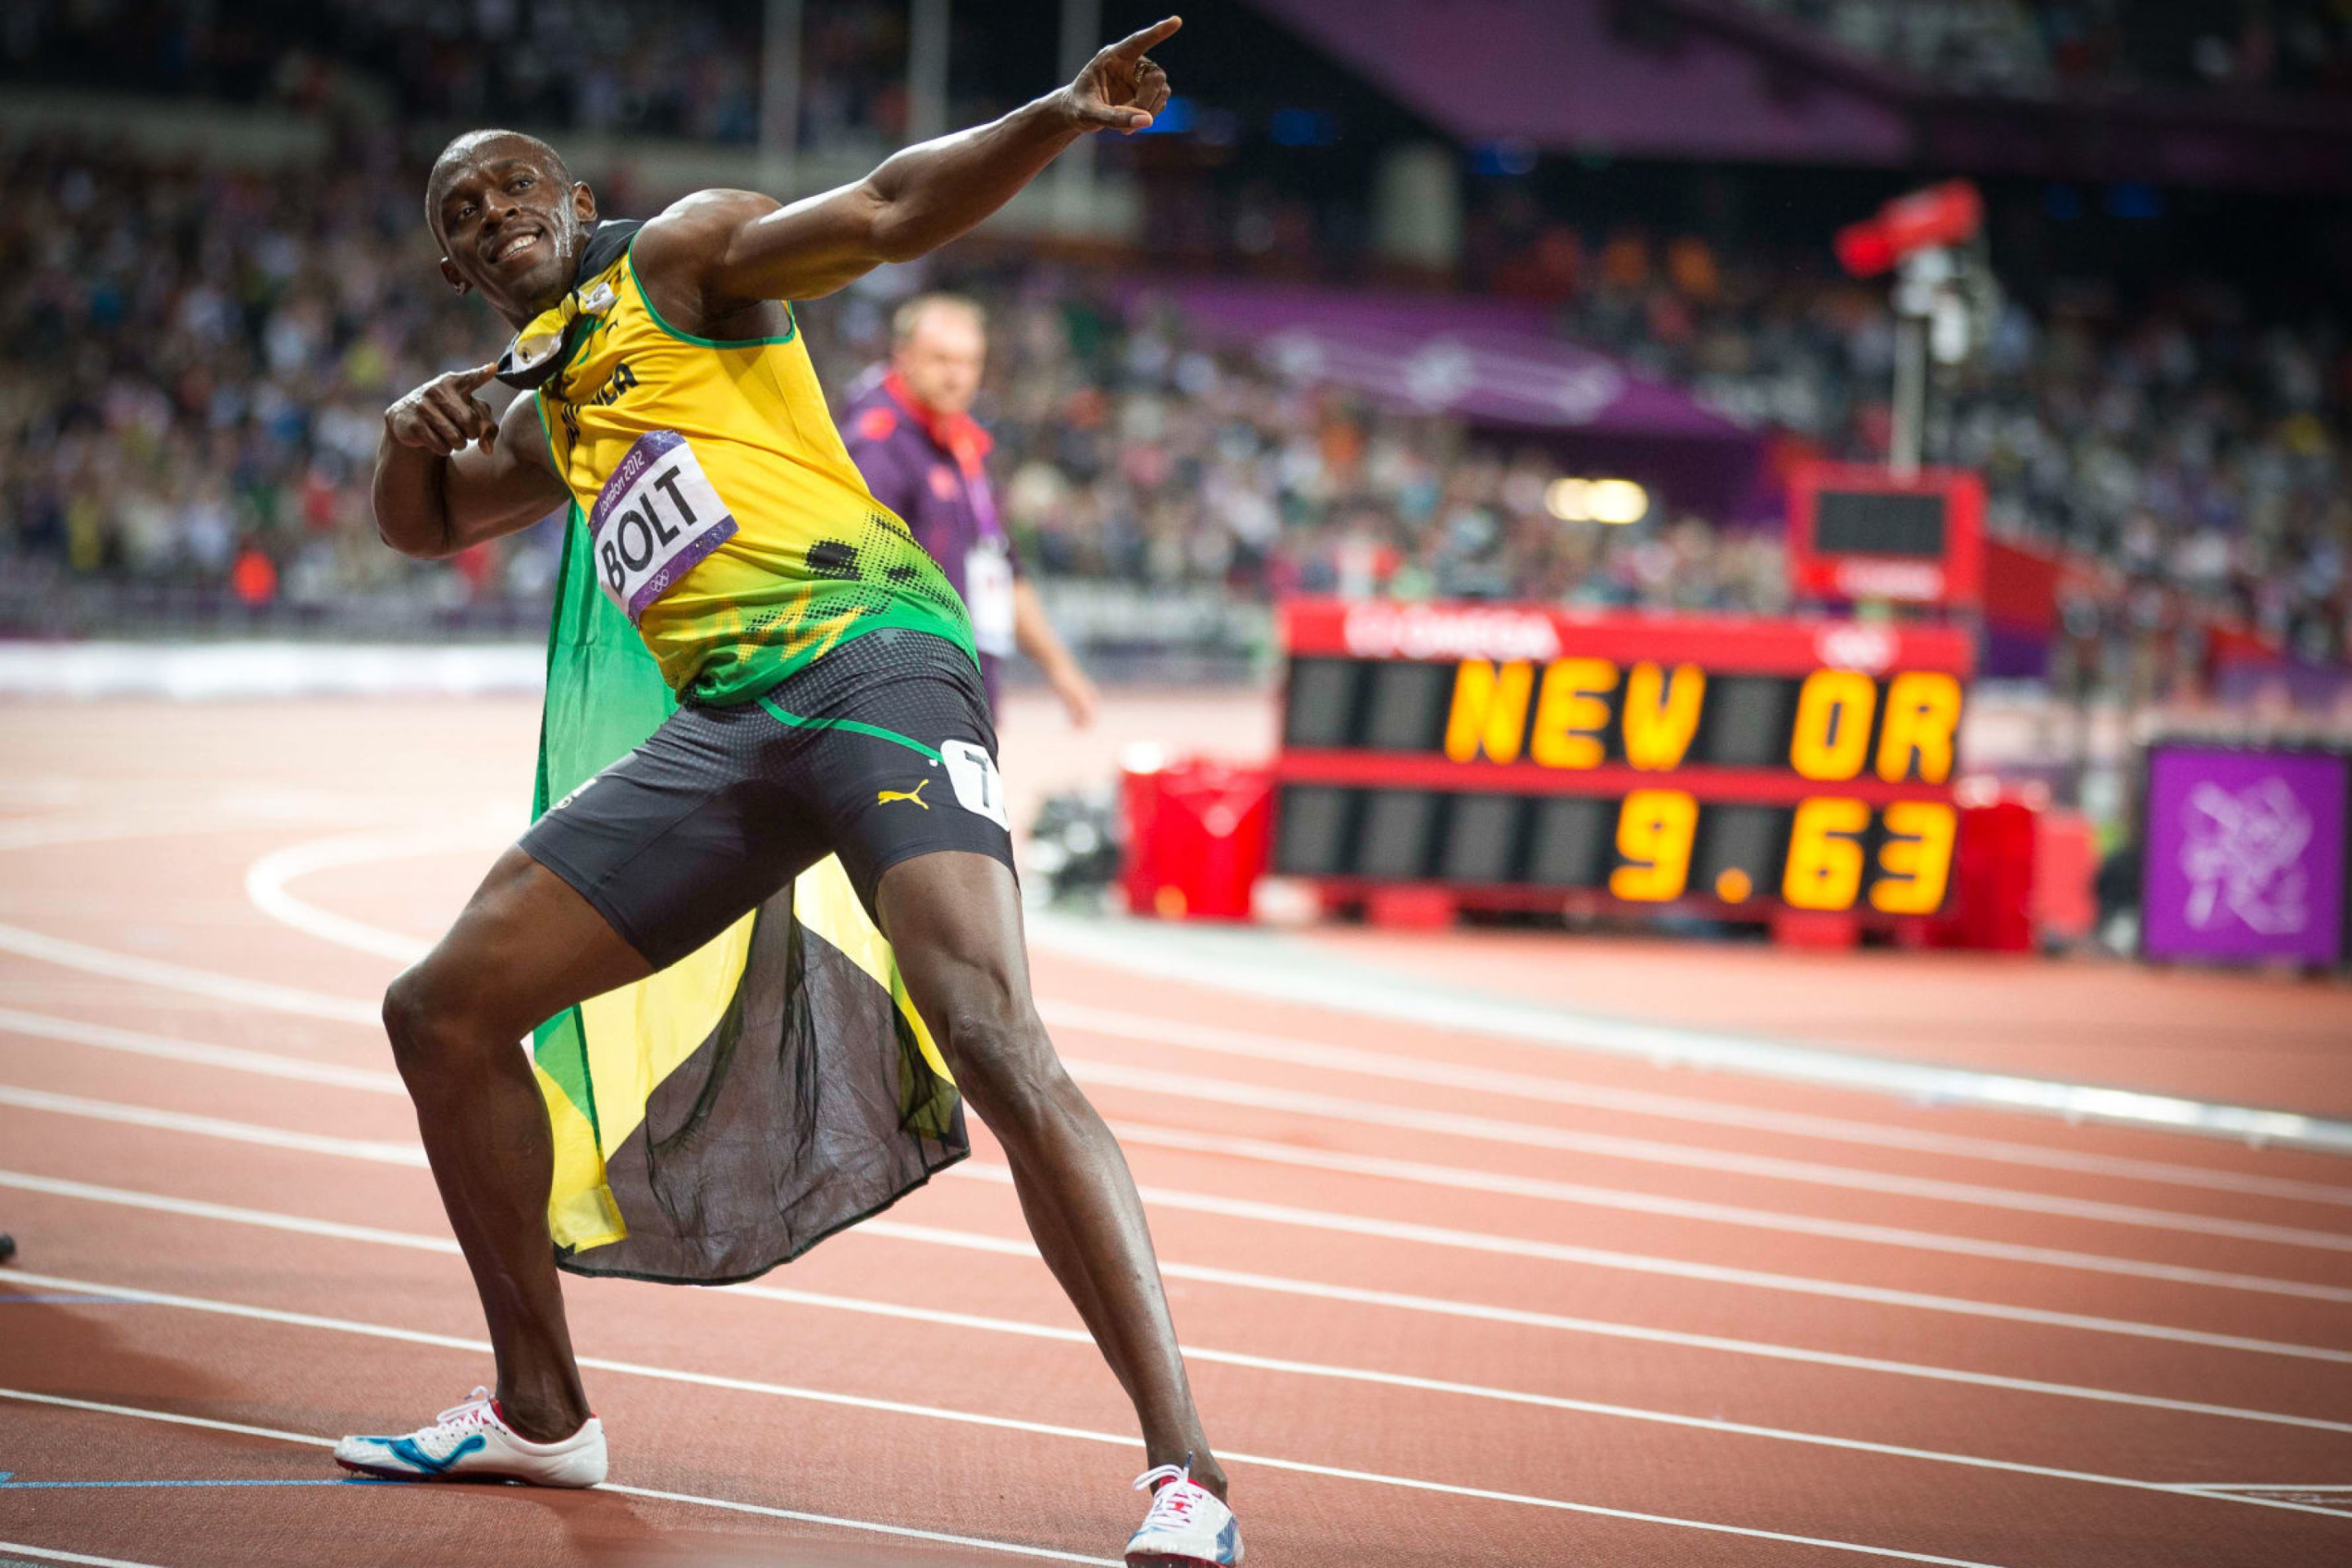 Обои Usain Bolt won medals in the Olympics 2880x1920